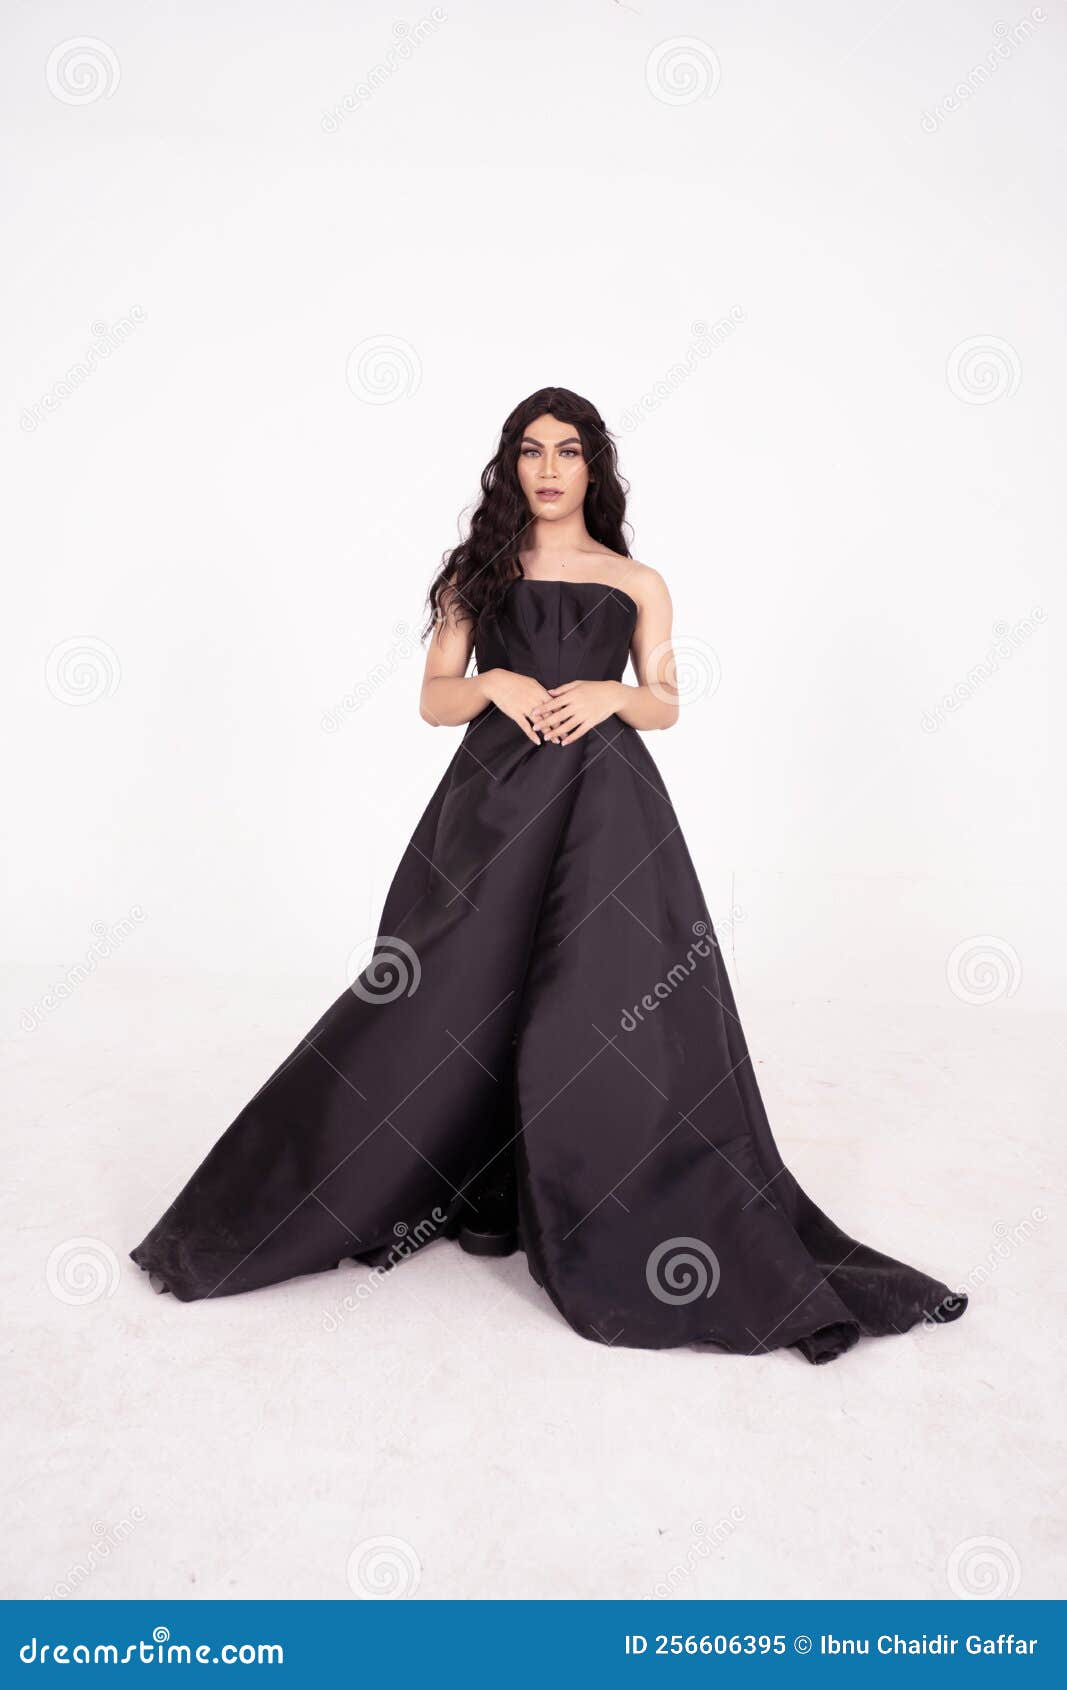 A Beautiful Asian Bride in a Black Wedding Dress Poses Stock Image ...